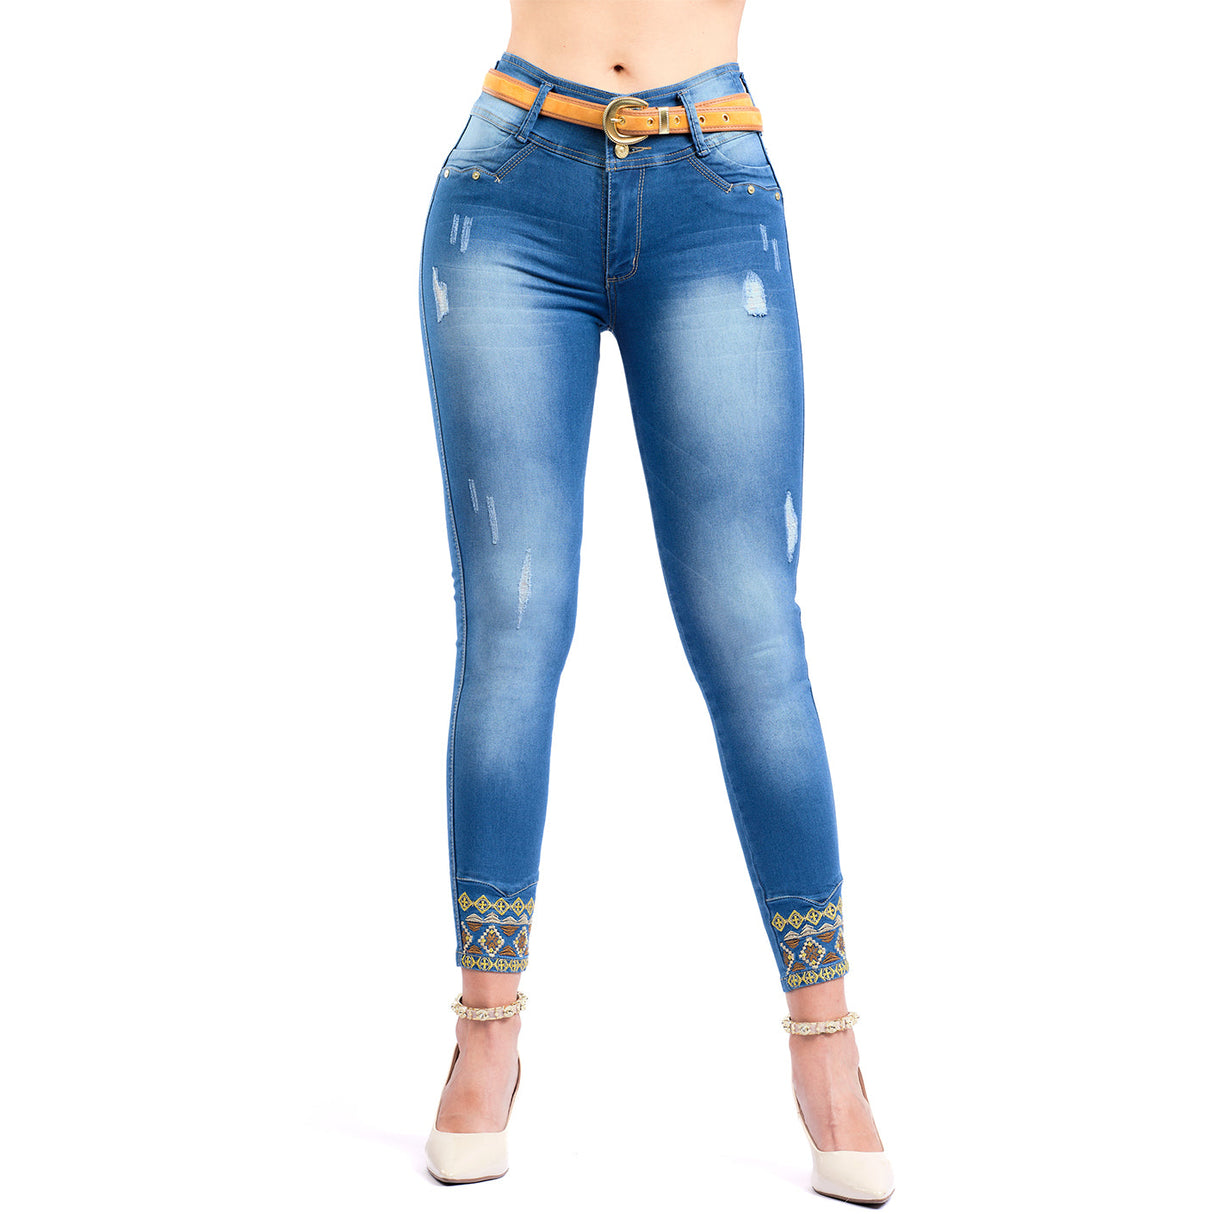 Jeans Colombianos 1500